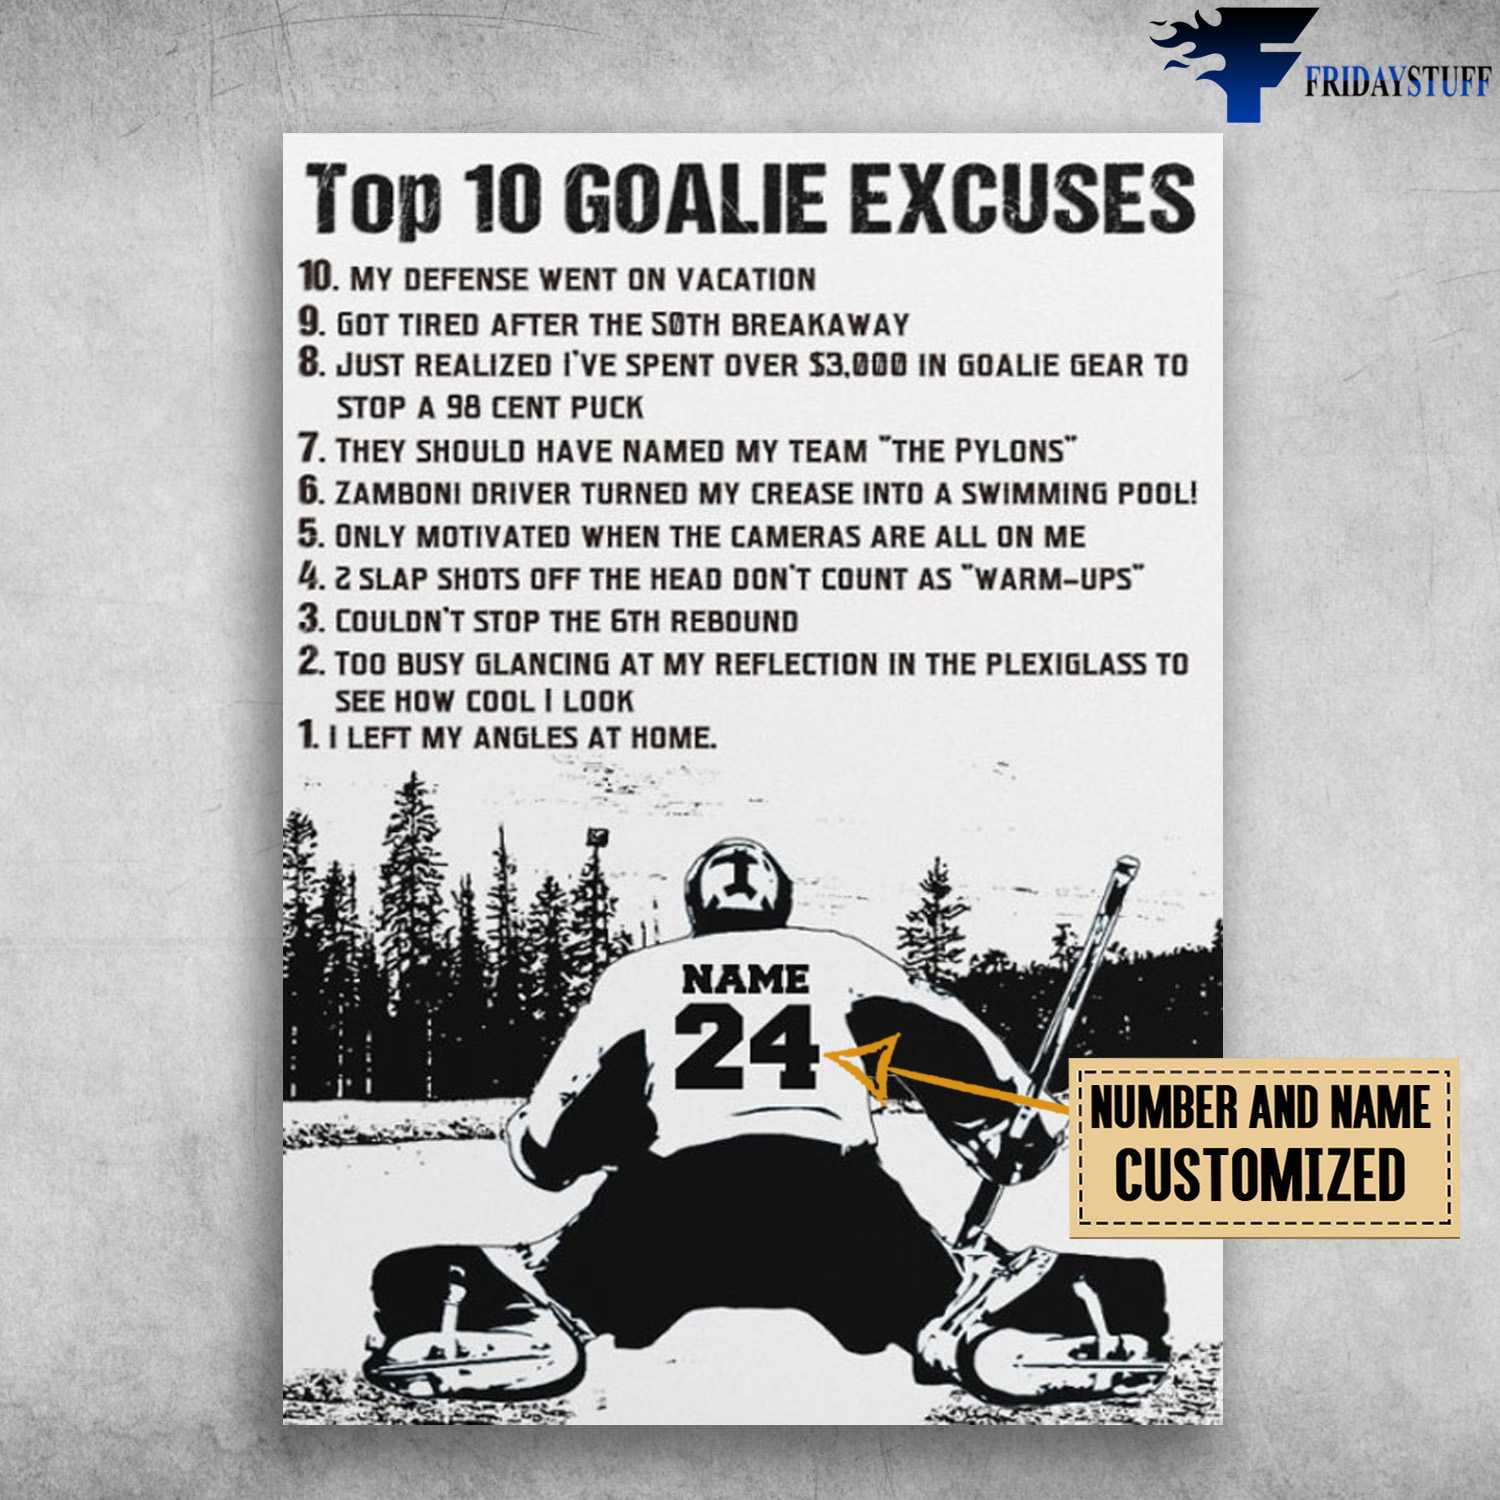 Hockey Lover, Ice Hockey Poster, Top 10 Goalie Excuses, My Defense Went On Vacation, Got Tired After The Soth Breakaway